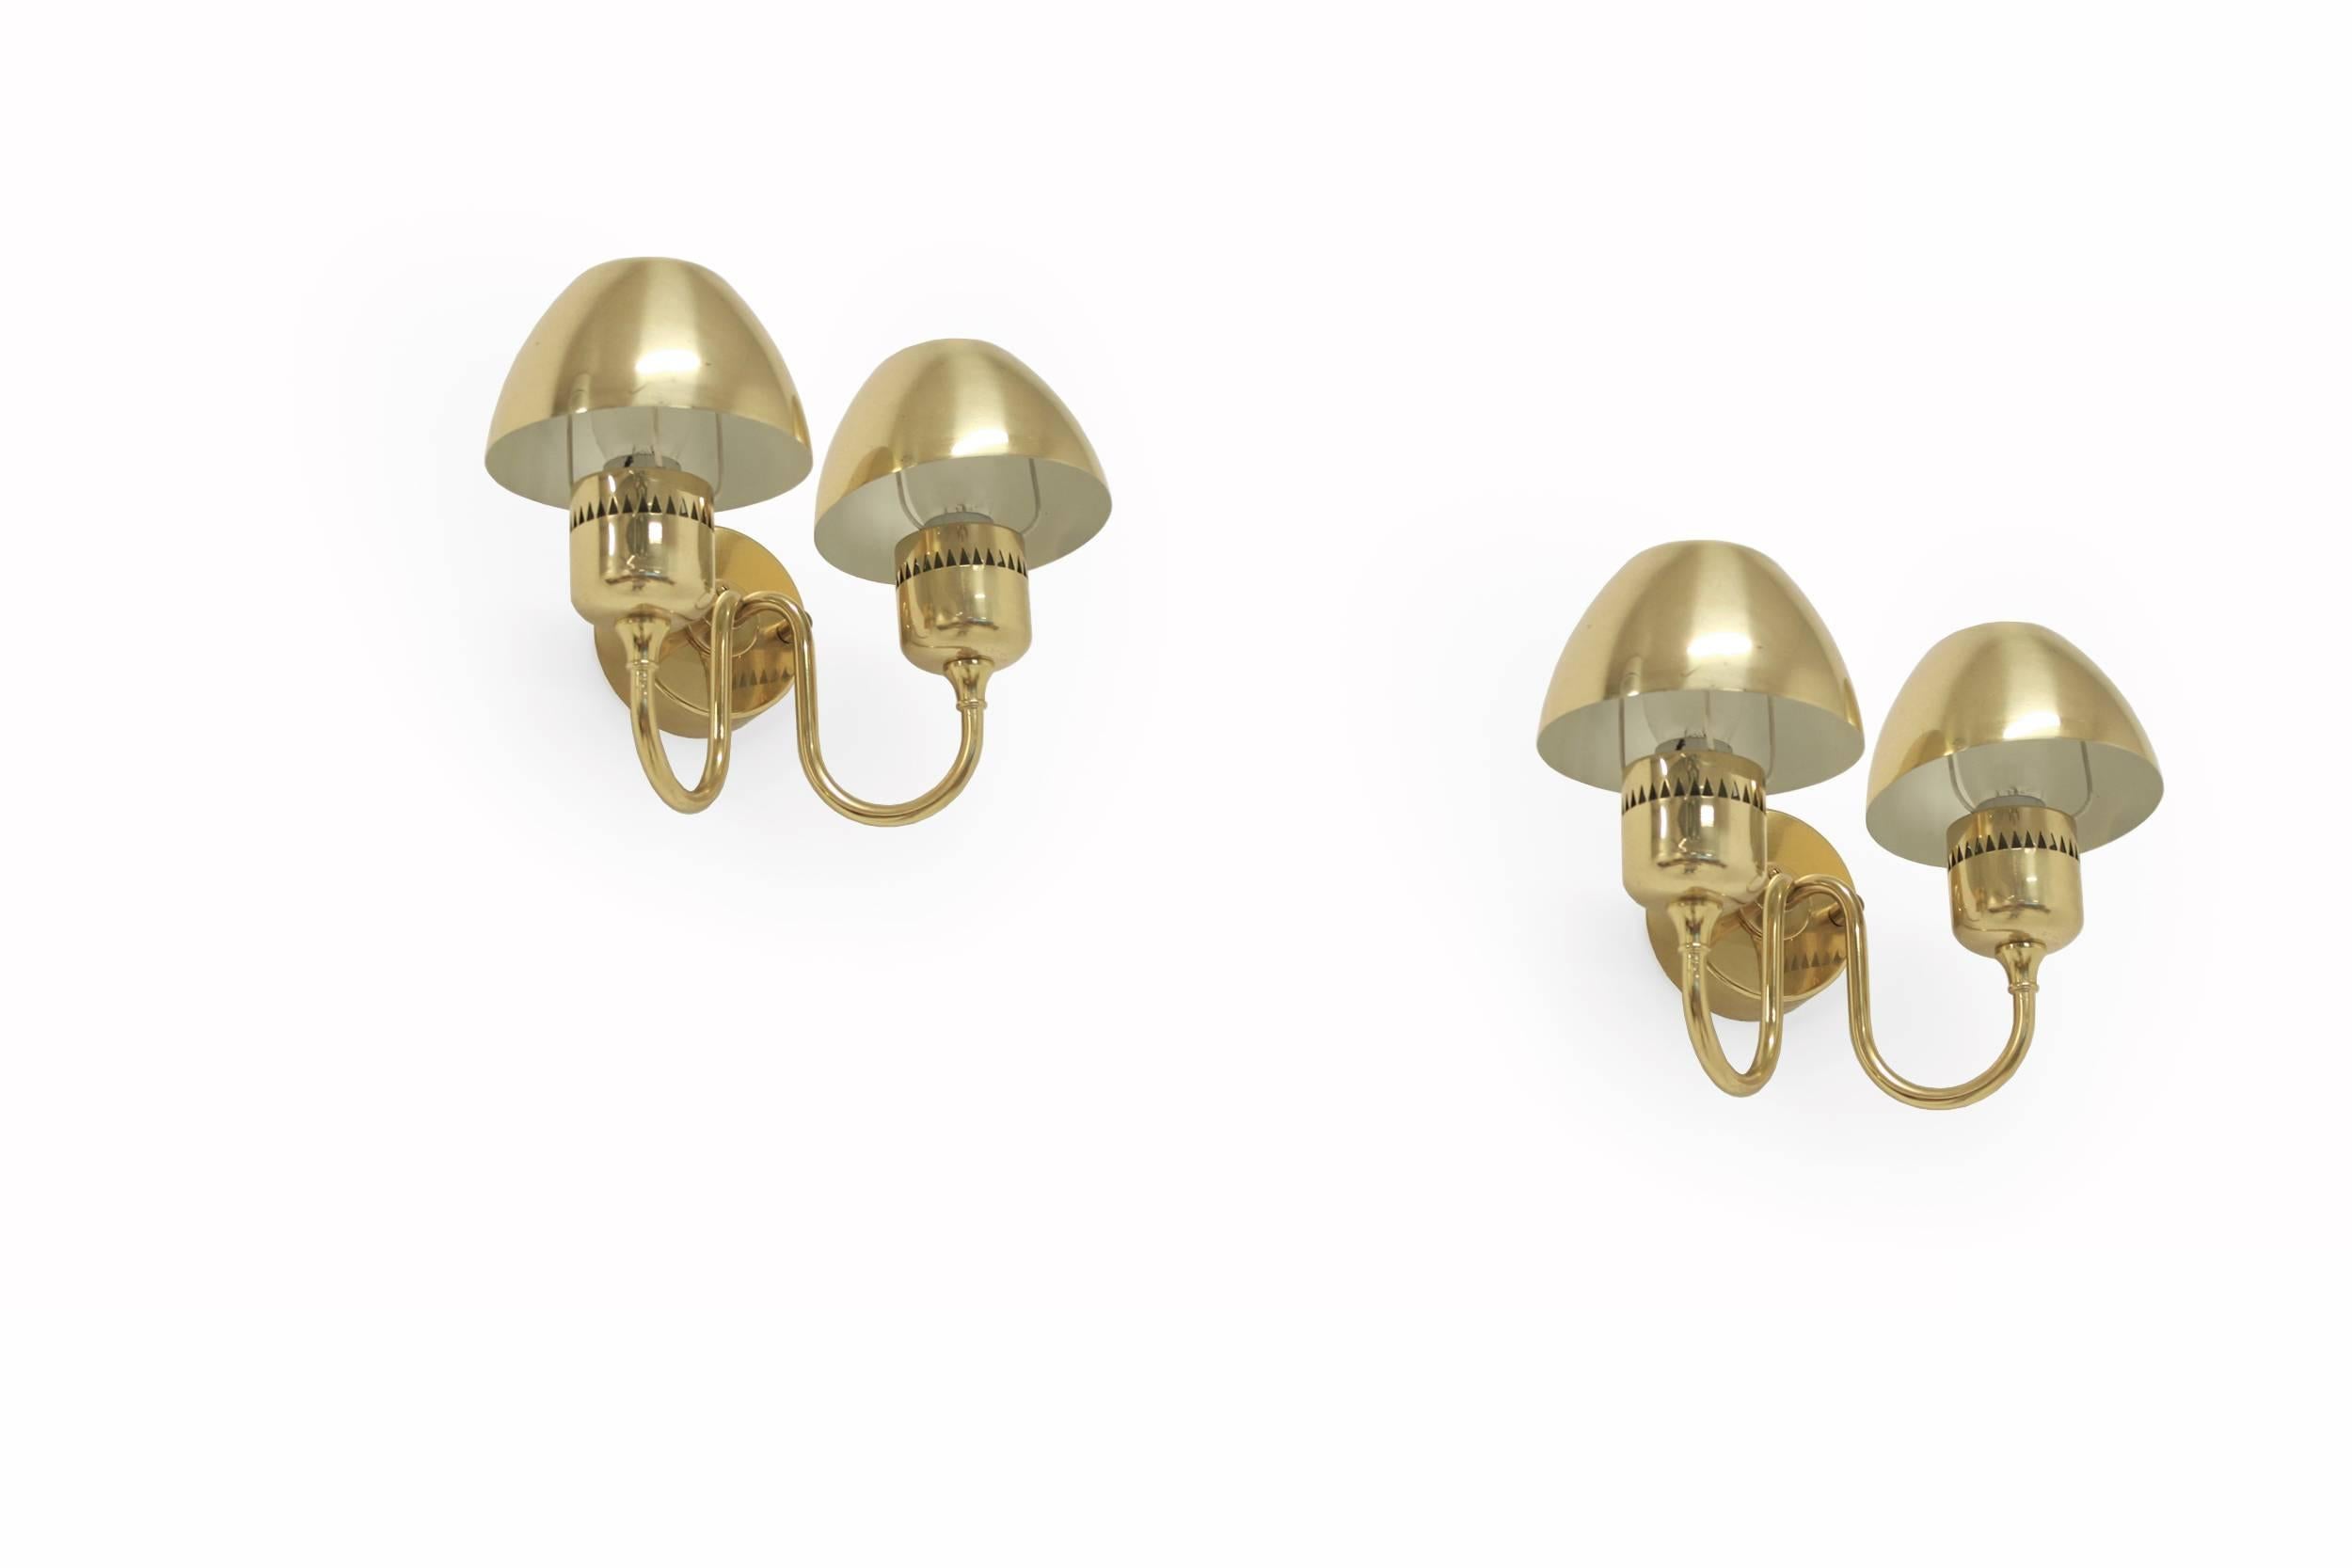 Swedish Pair of Wall Lights in Brass by Hans-Agne Jakobsson, 1960s